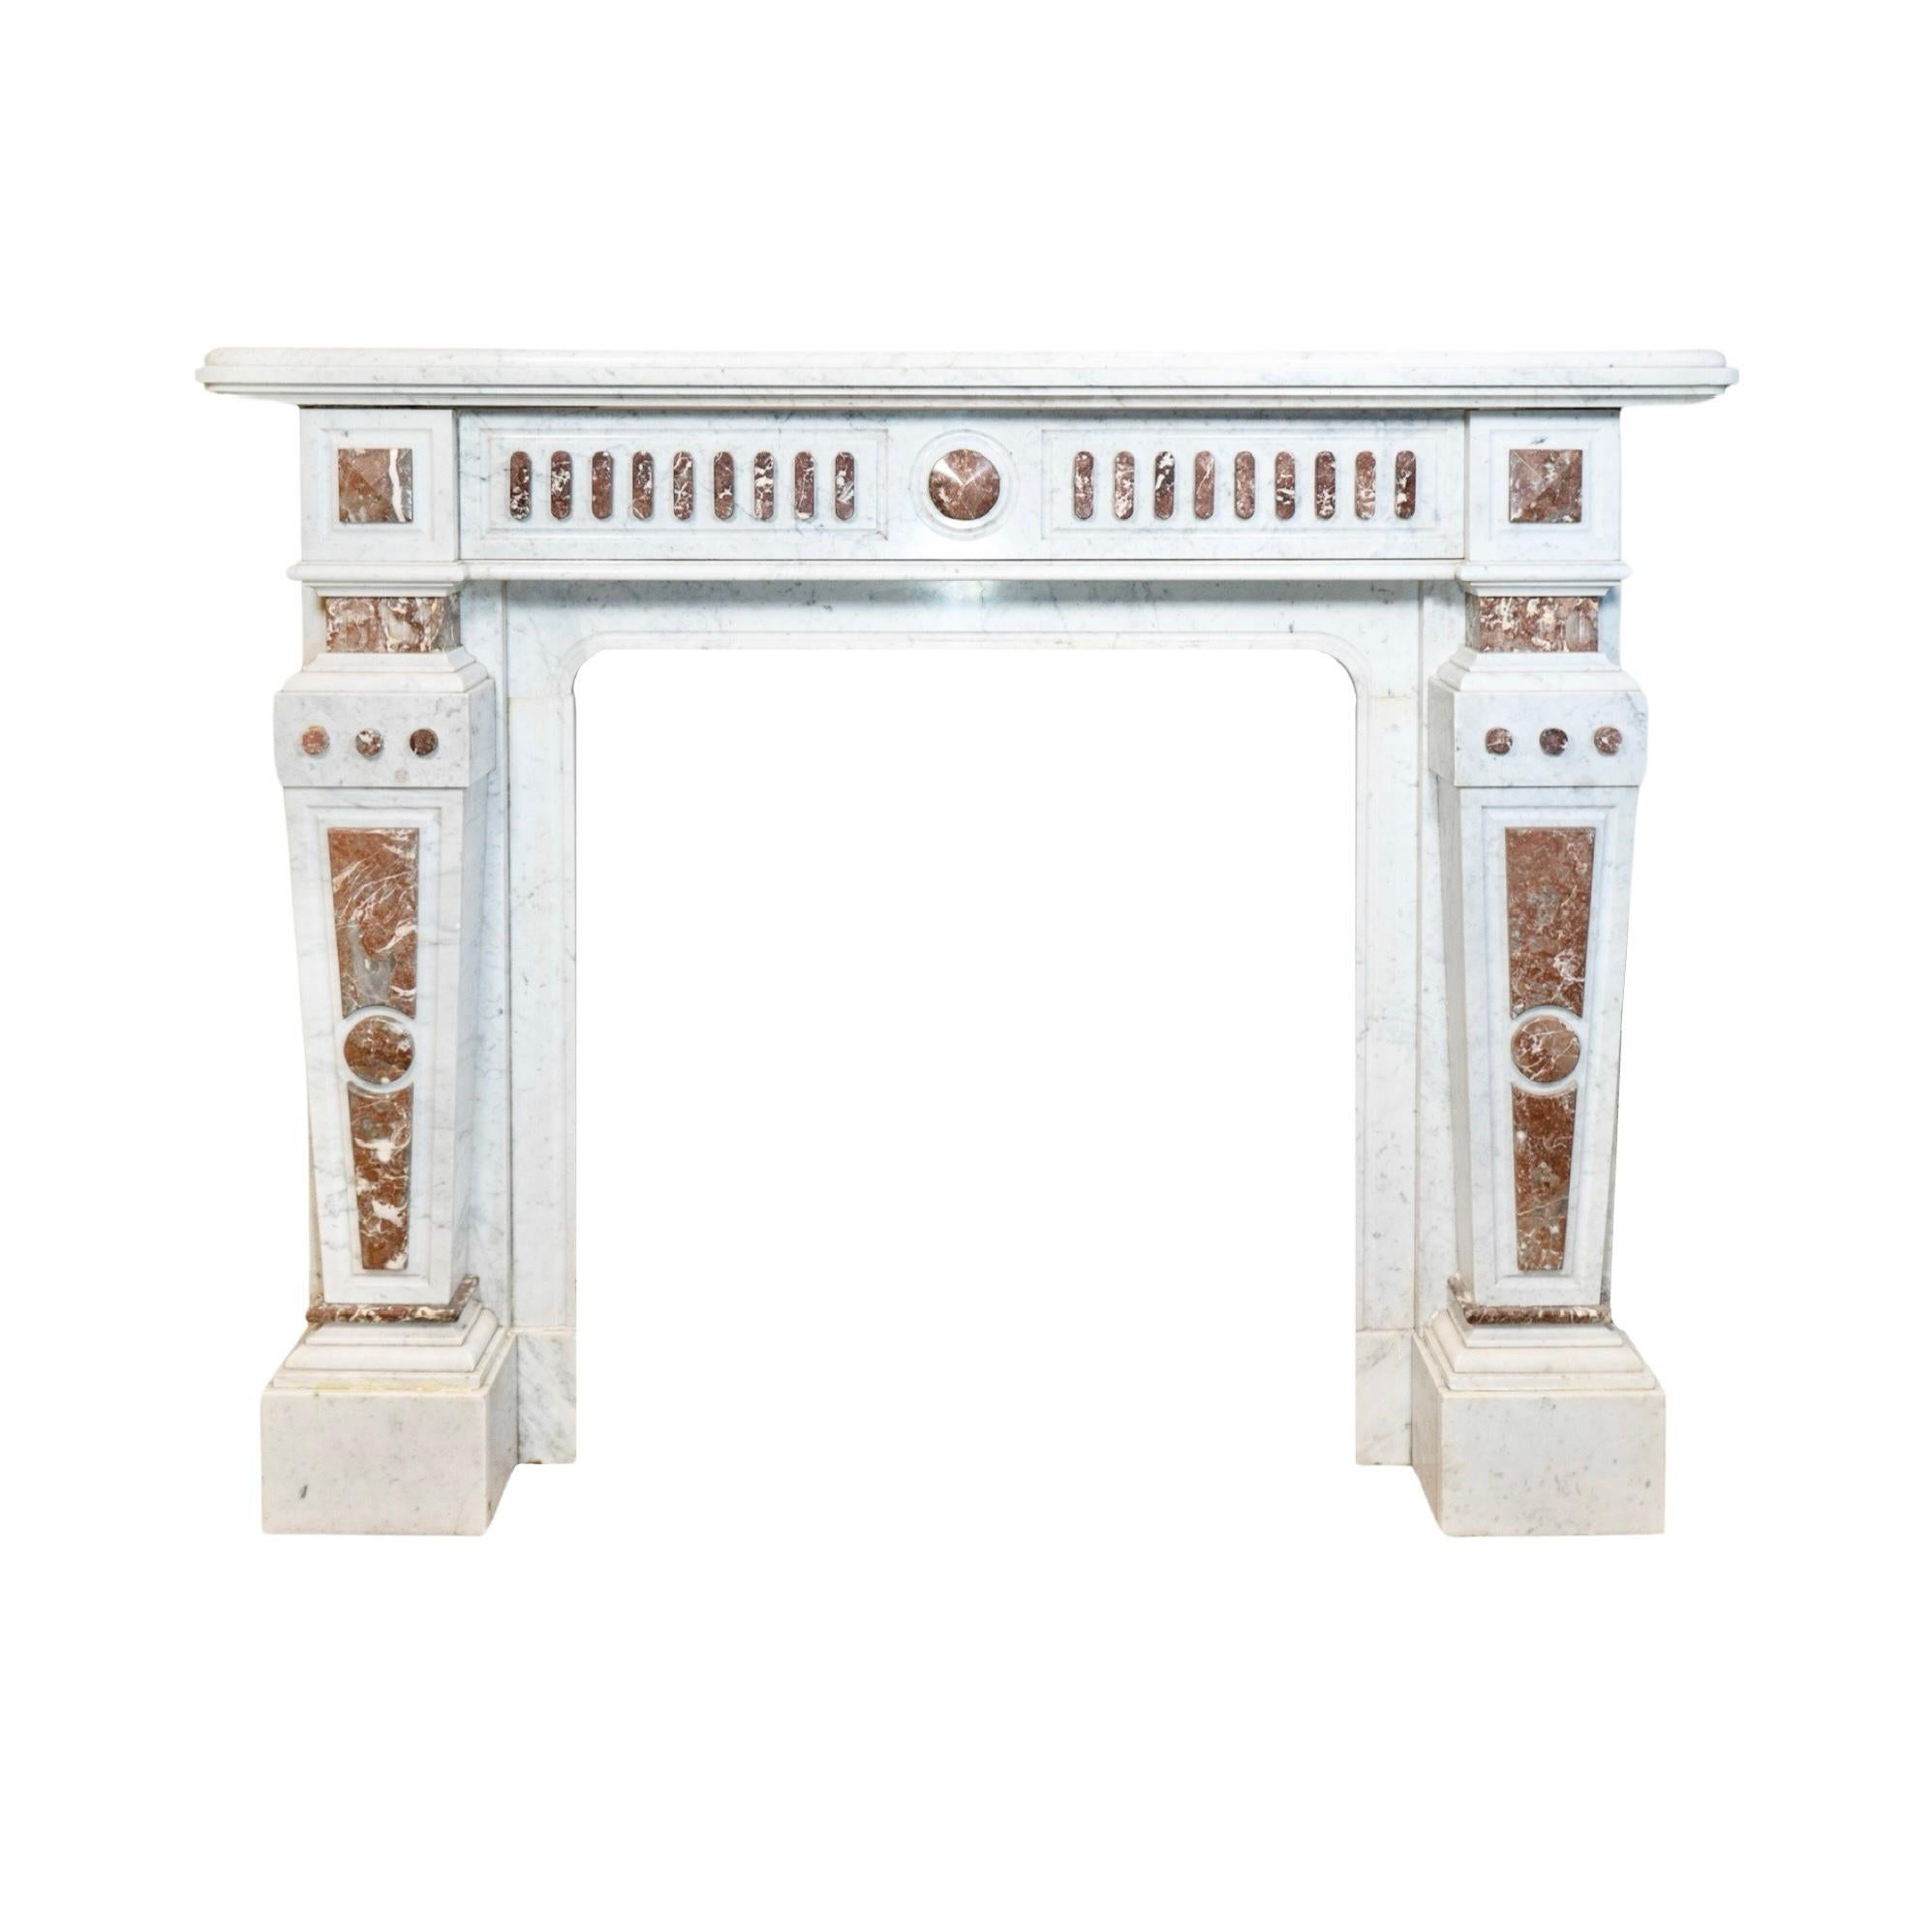 This 19th century French mantel is a classic and elegant addition to any home. The white veined Carrara marble adds timeless beauty, while the Royal Red marble accents provide a touch of luxury. Mined from France, this mantel is a true